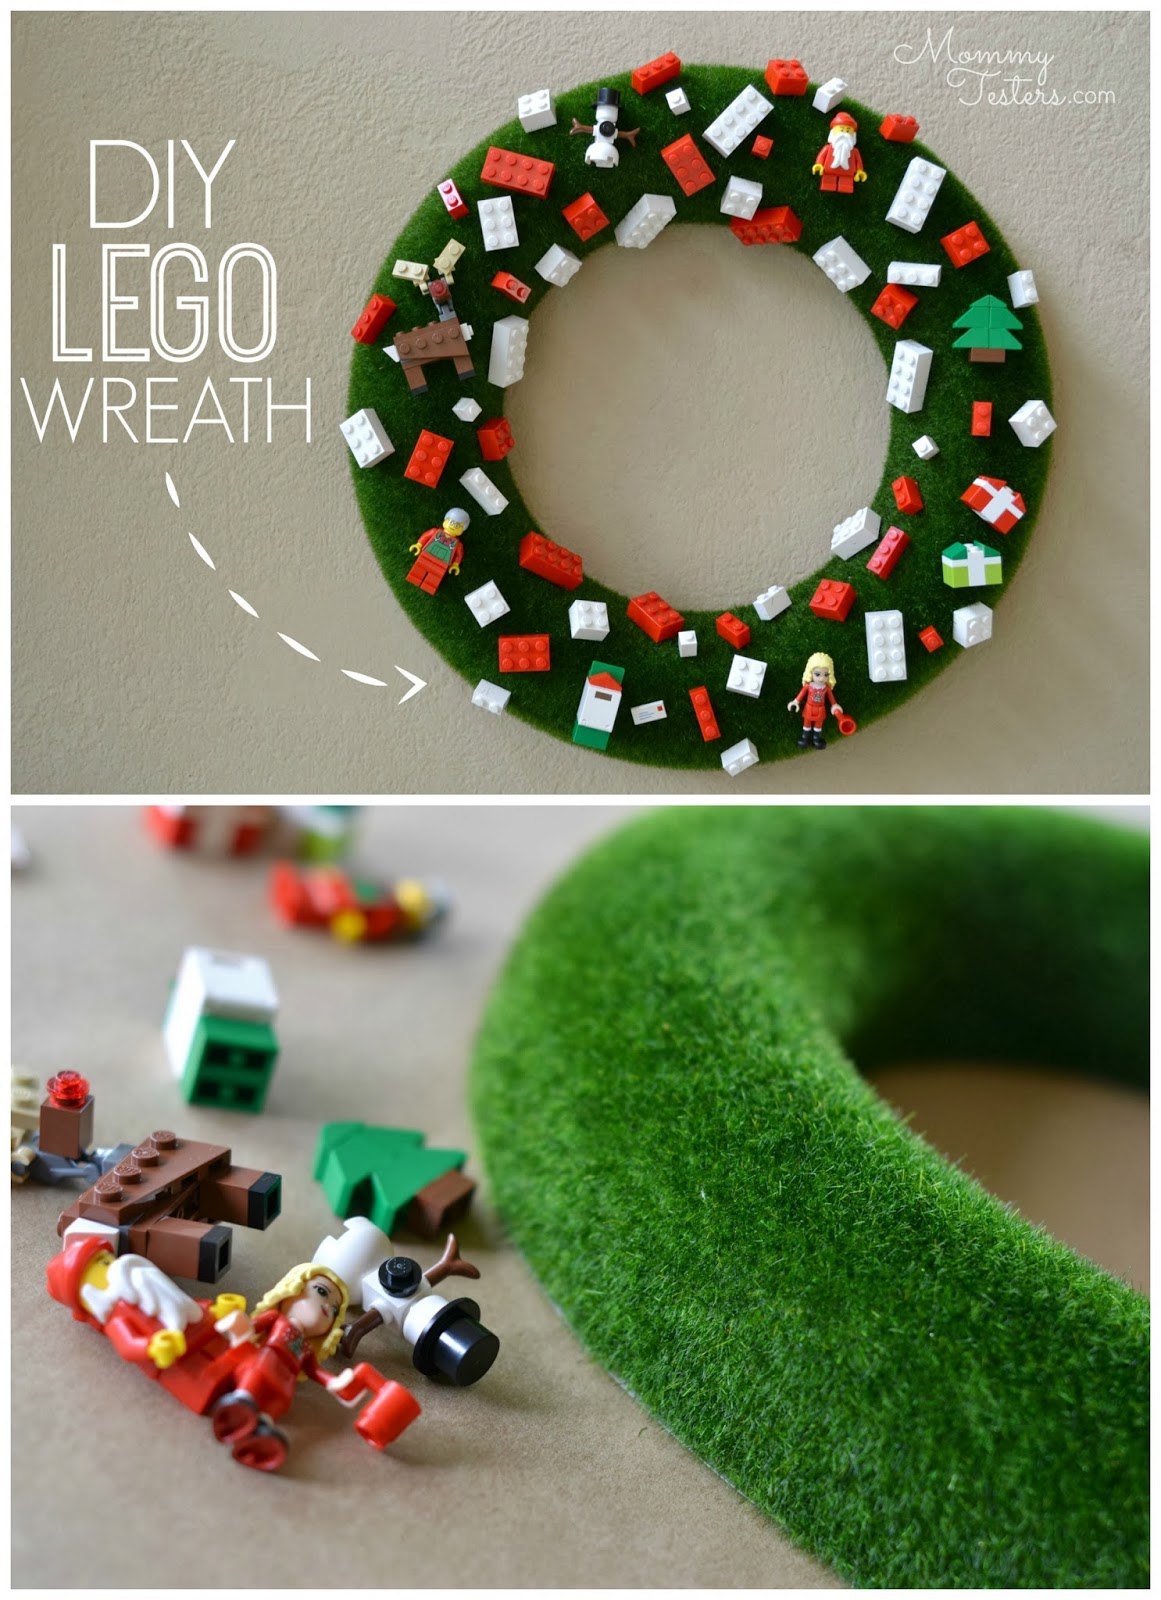 Great Christmas craft ideas with kids in mind